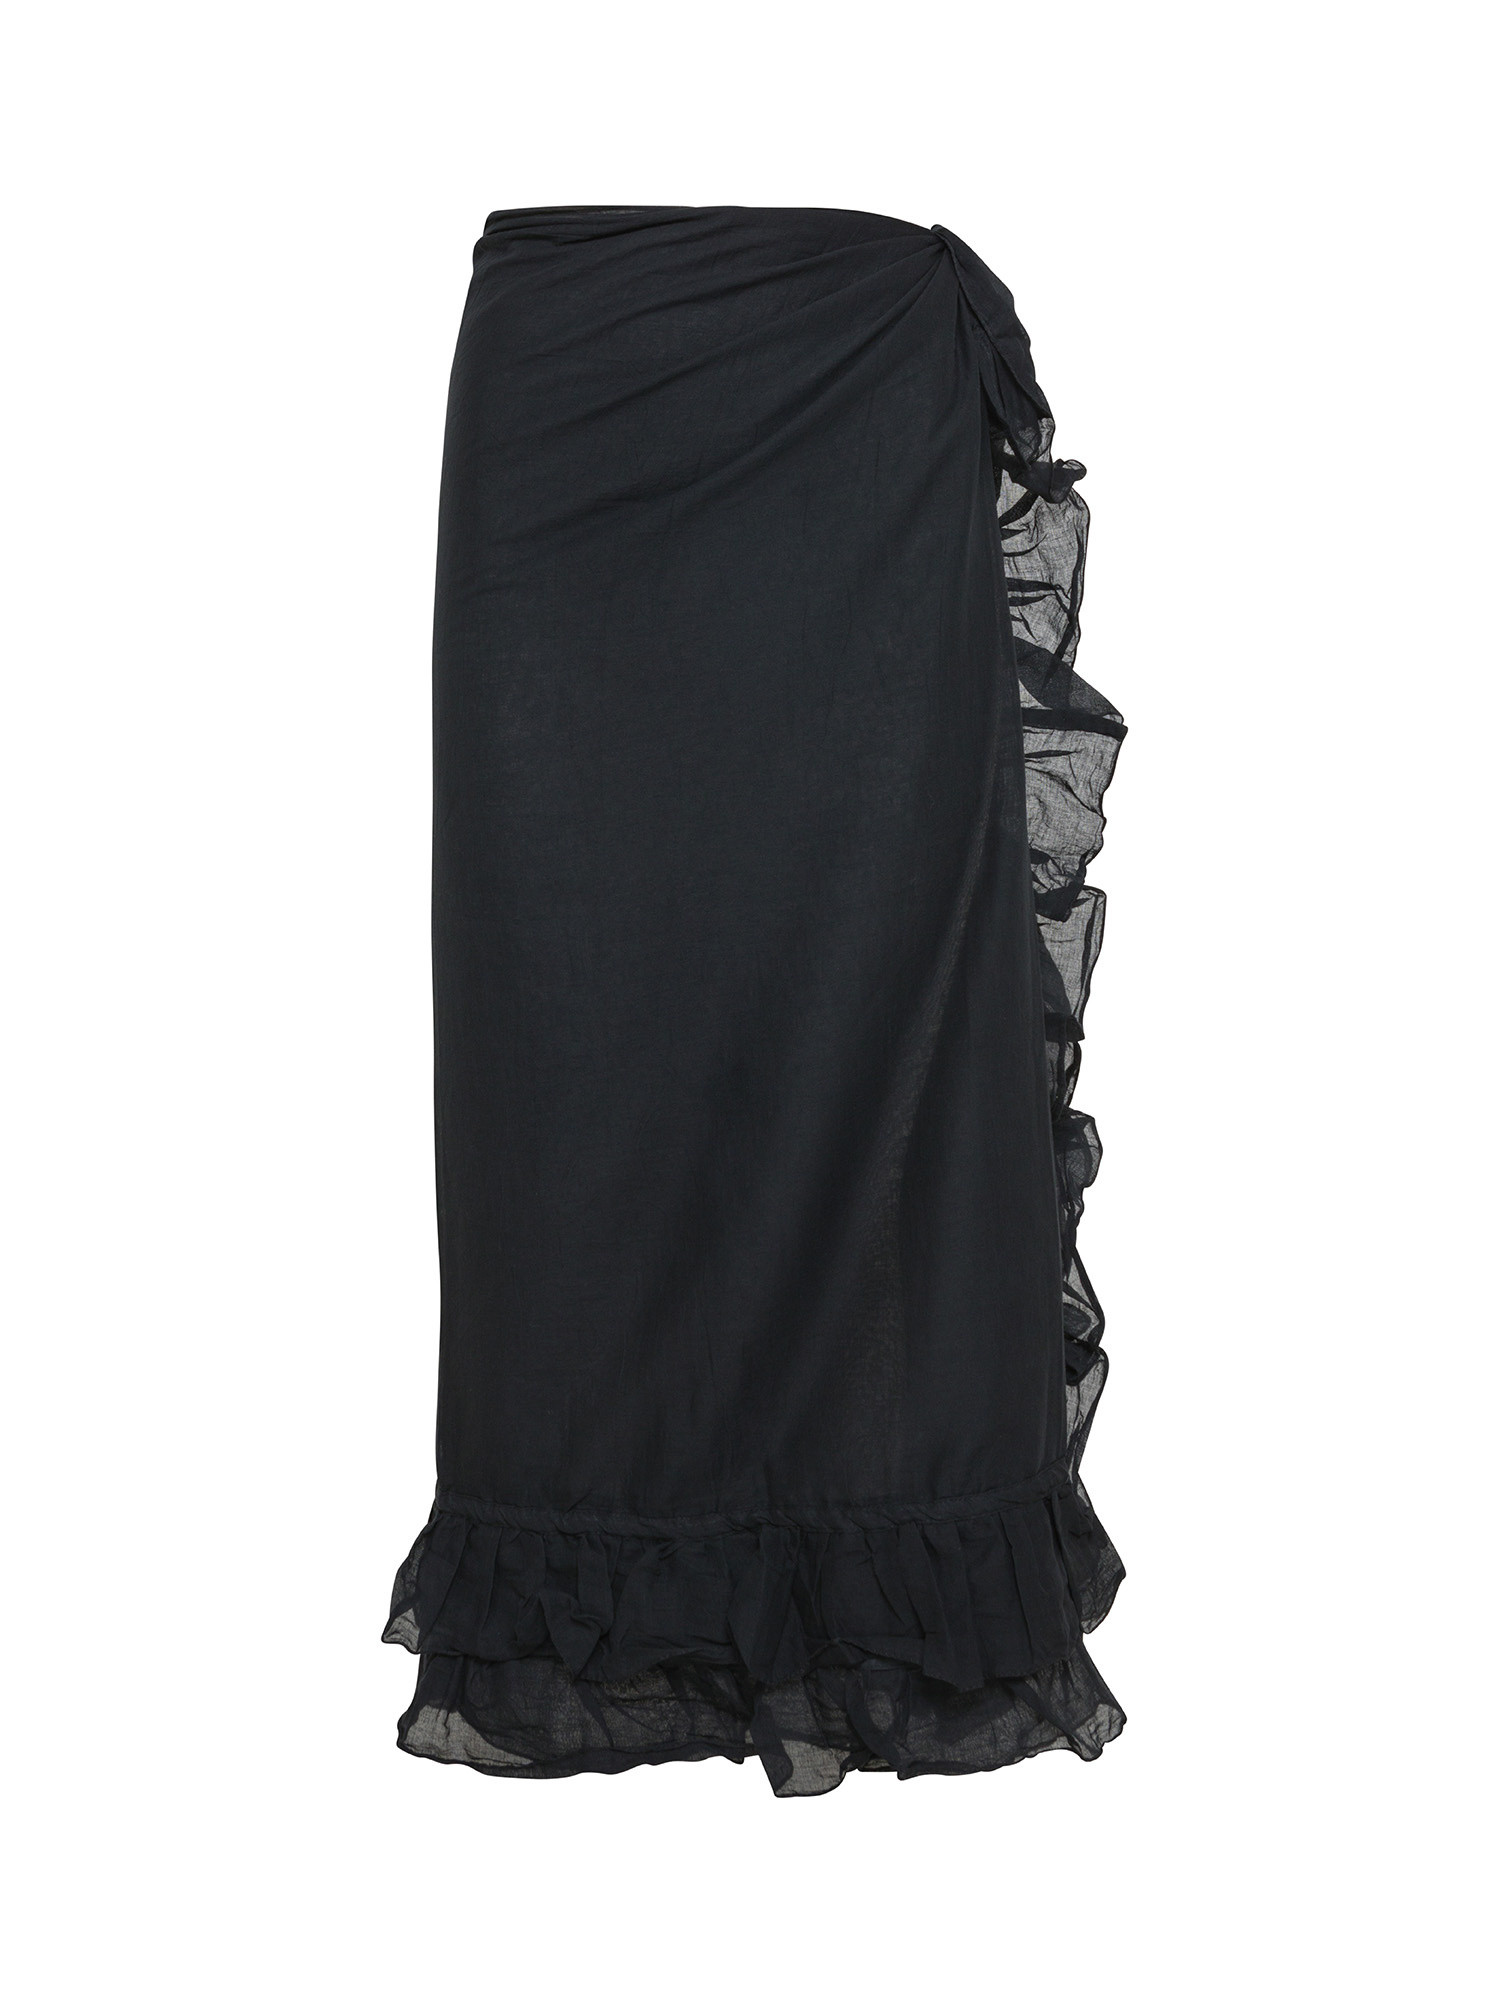 Koan - Sarong in cotton with ruffles, Black, large image number 0